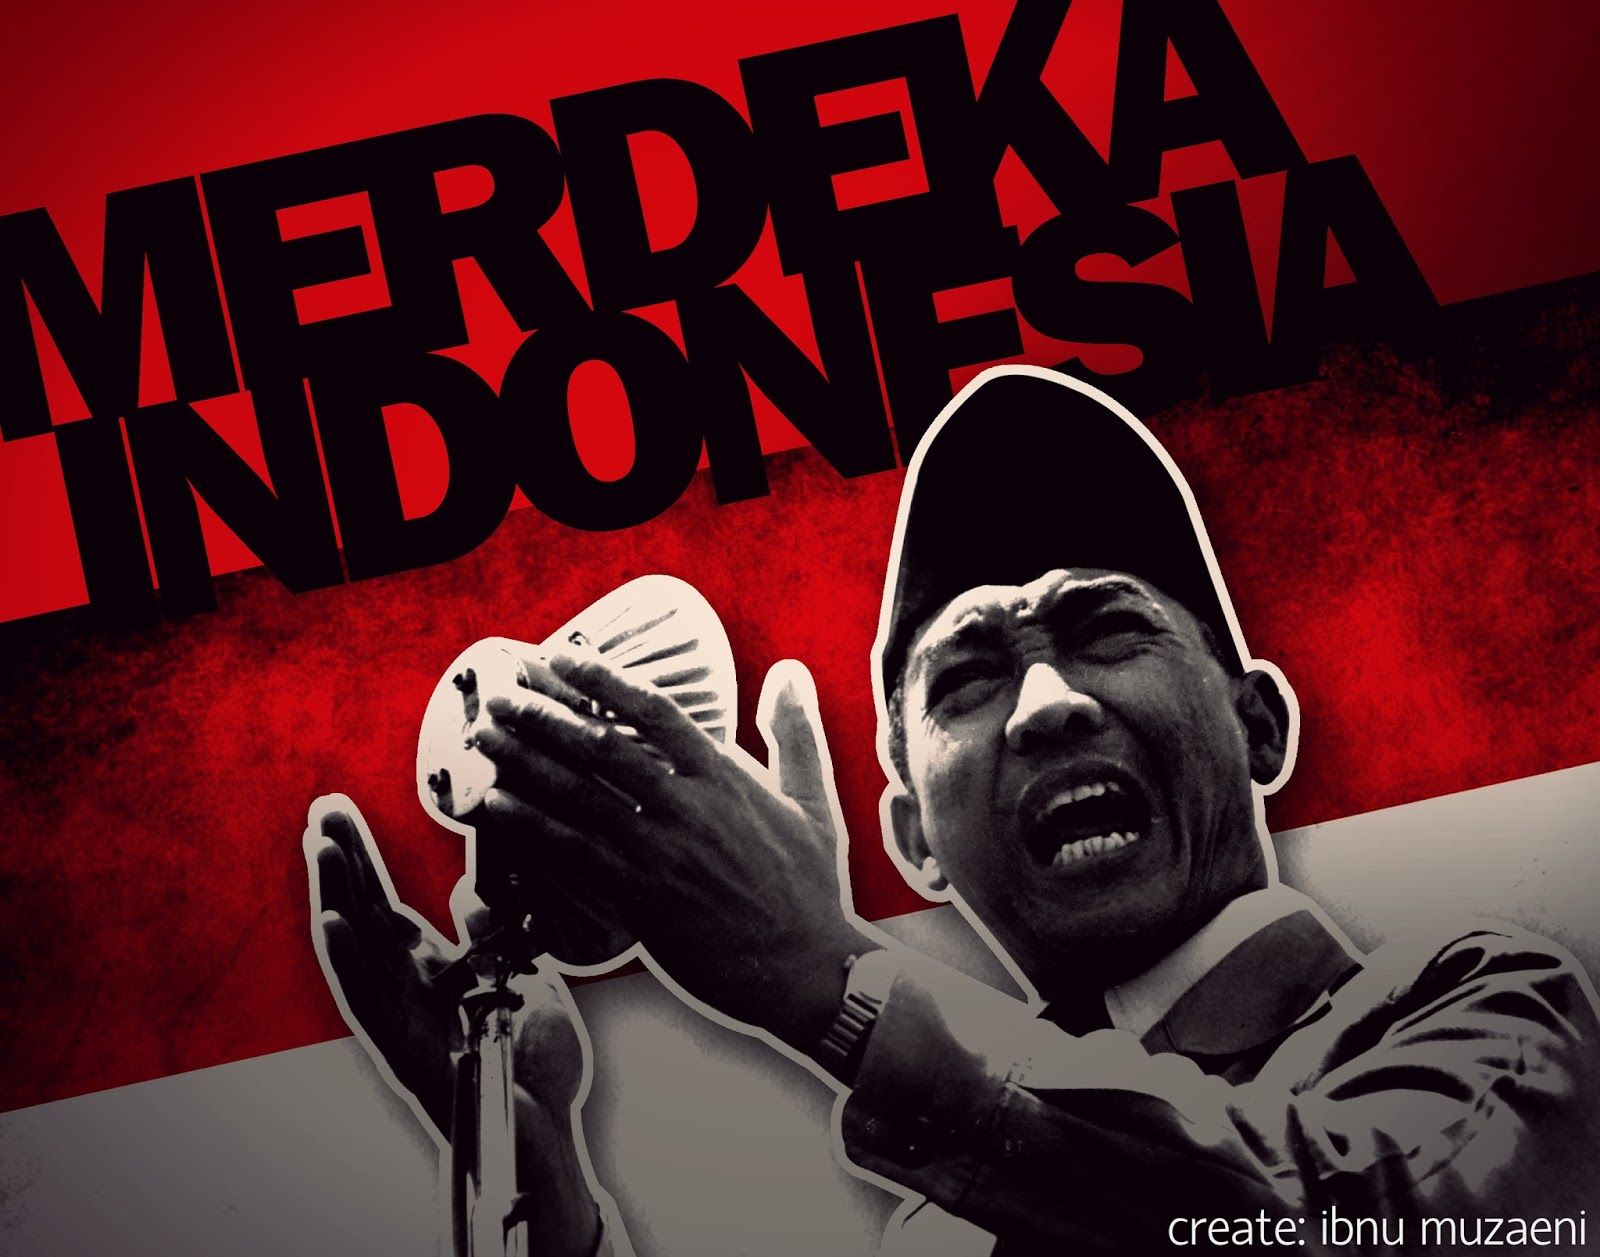 All About your Life !!: (Art) Wallpaper Bung Karno